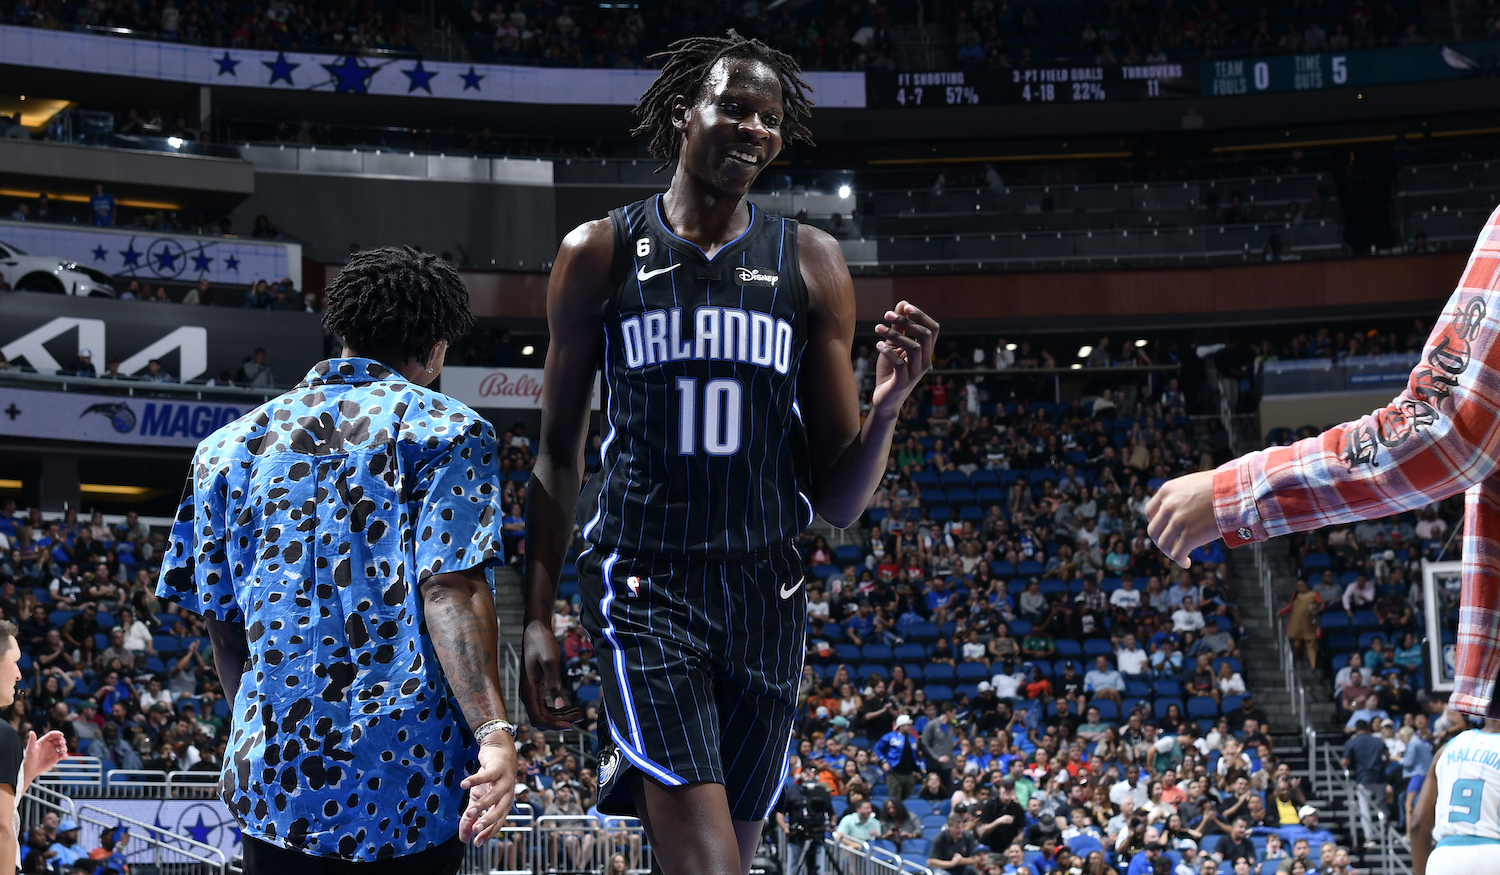 ORLANDO, FL - OCTOBER 28: Bol Bol #10 of the Orlando Magic smiles during the game against the Charlotte Hornets on October 28, 2022 at Amway Center in Orlando, Florida. NOTE TO USER: User expressly acknowledges and agrees that, by downloading and or using this photograph, User is consenting to the terms and conditions of the Getty Images License Agreement. Mandatory Copyright Notice: Copyright 2022 NBAE (Photo by Fernando Medina/NBAE via Getty Images)